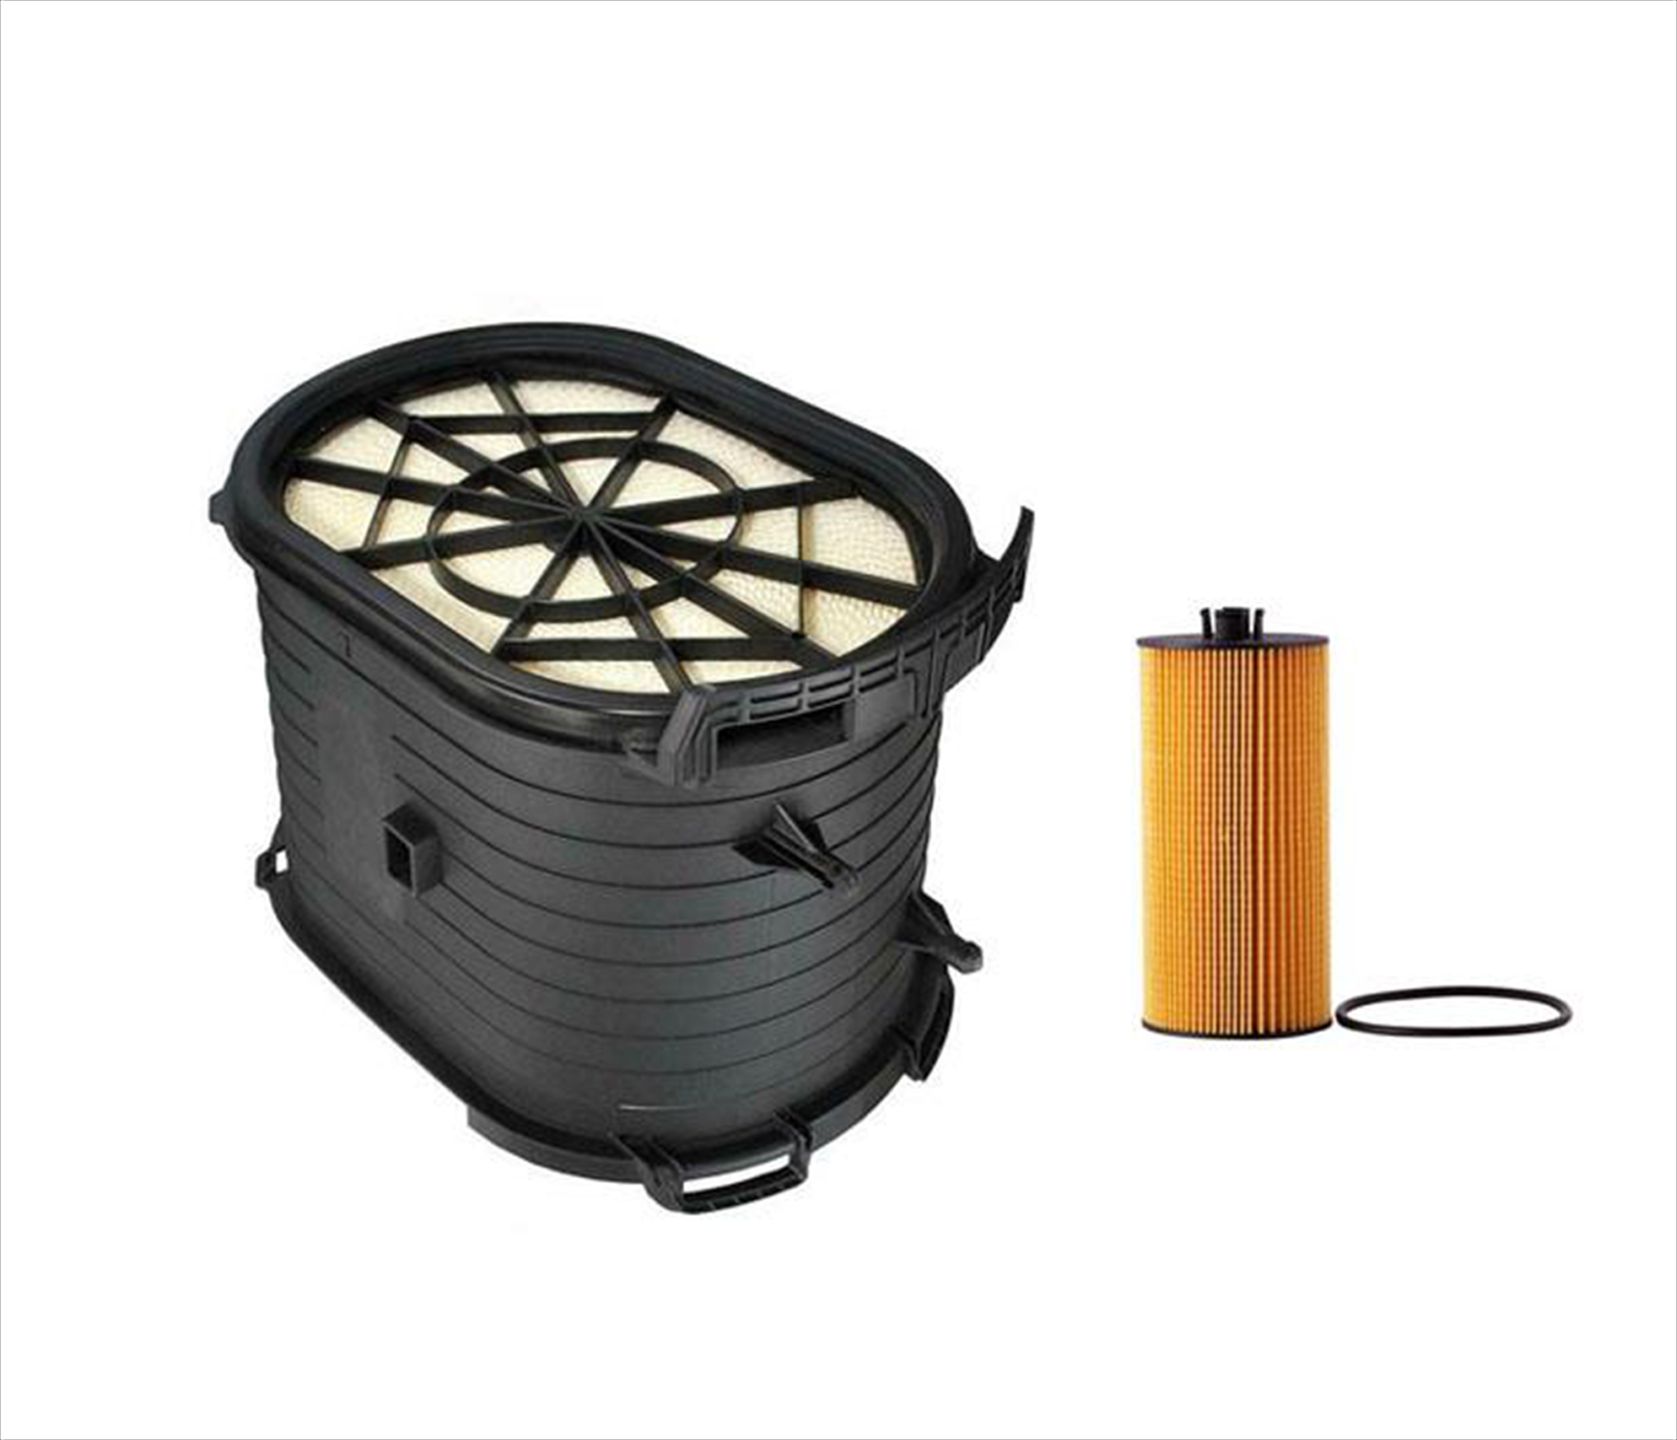 Oil & Air Filter Fits for Ford Diesel F250 with the 6.0 liter Turbo 03 2006 Ford F250 6.0 Diesel Oil Filter